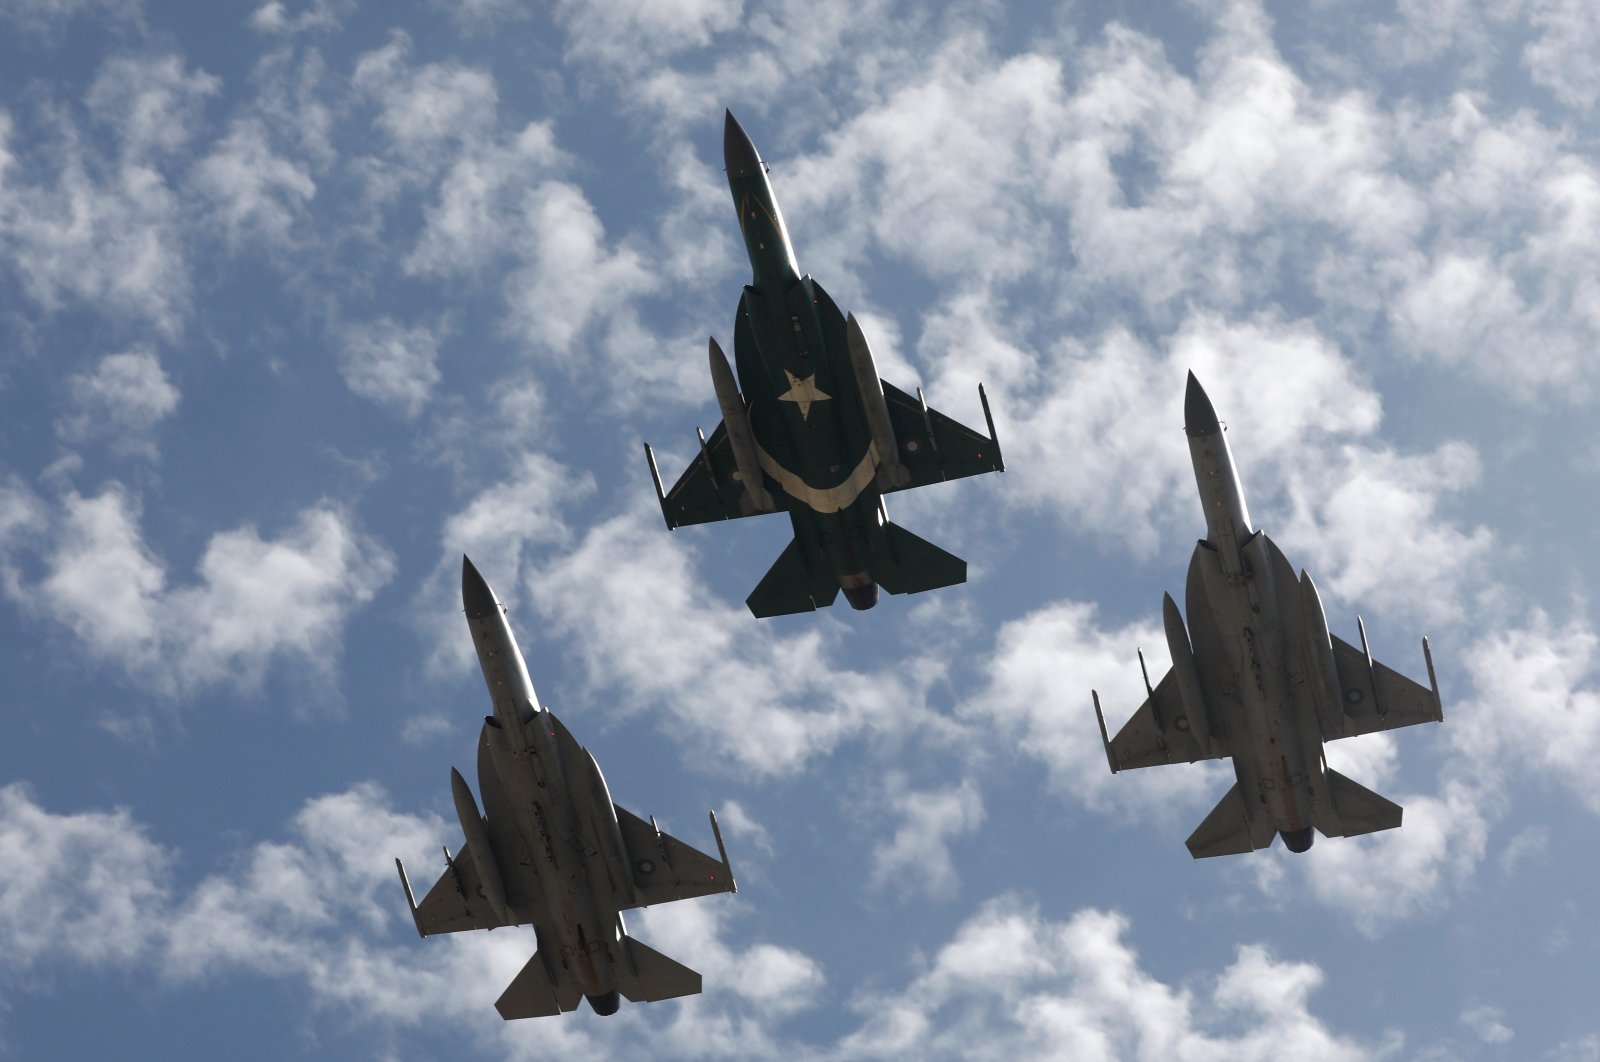 Pakistan Air Force (PAF) JF-17 Thunder jets perform to commemorate Pakistan Air Force's 'Operation Swift Retort', following the shot down of Indian military aircrafts on February 27, 2019 in Kashmir, during an air show in Karachi, Pakistan February 27, 2020. (Reuters Photo)